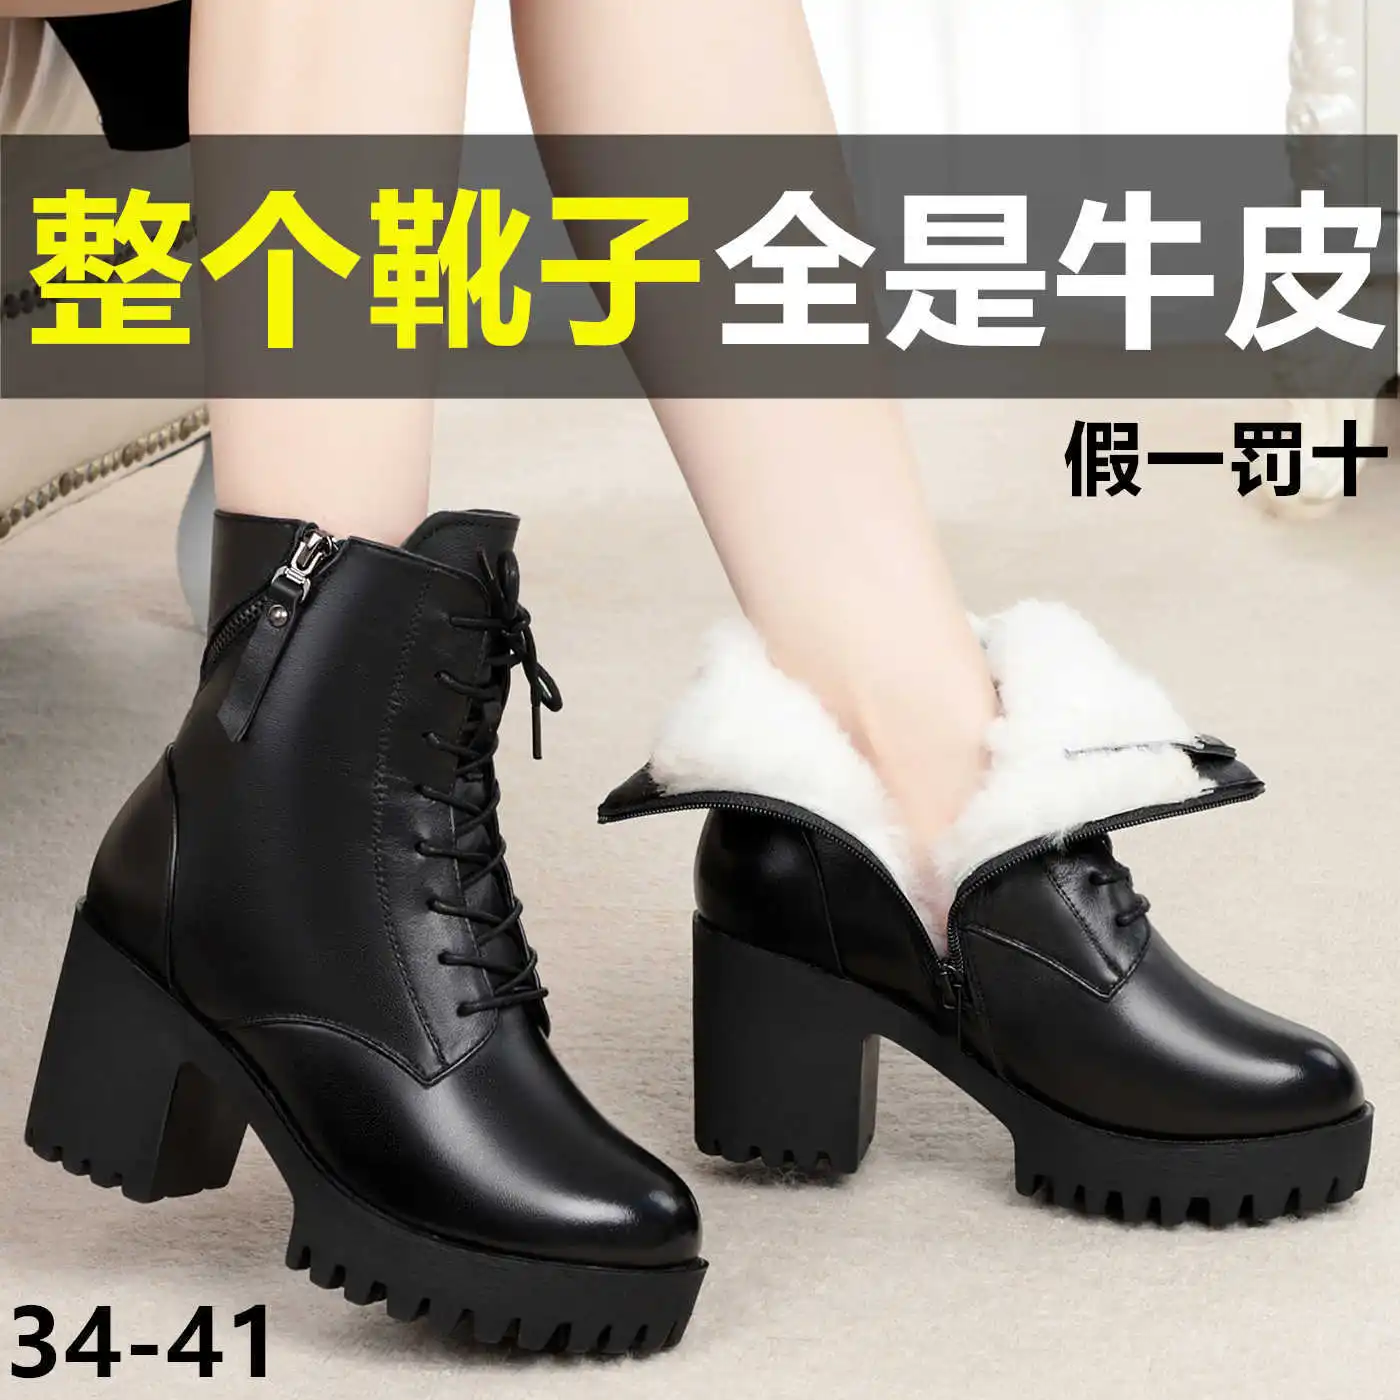 

2021winter New Full Cowhide Wool Boots Martens Boots Women's British Style Leathre over-Ankle Chunky Heel Thick Cotton High Heel